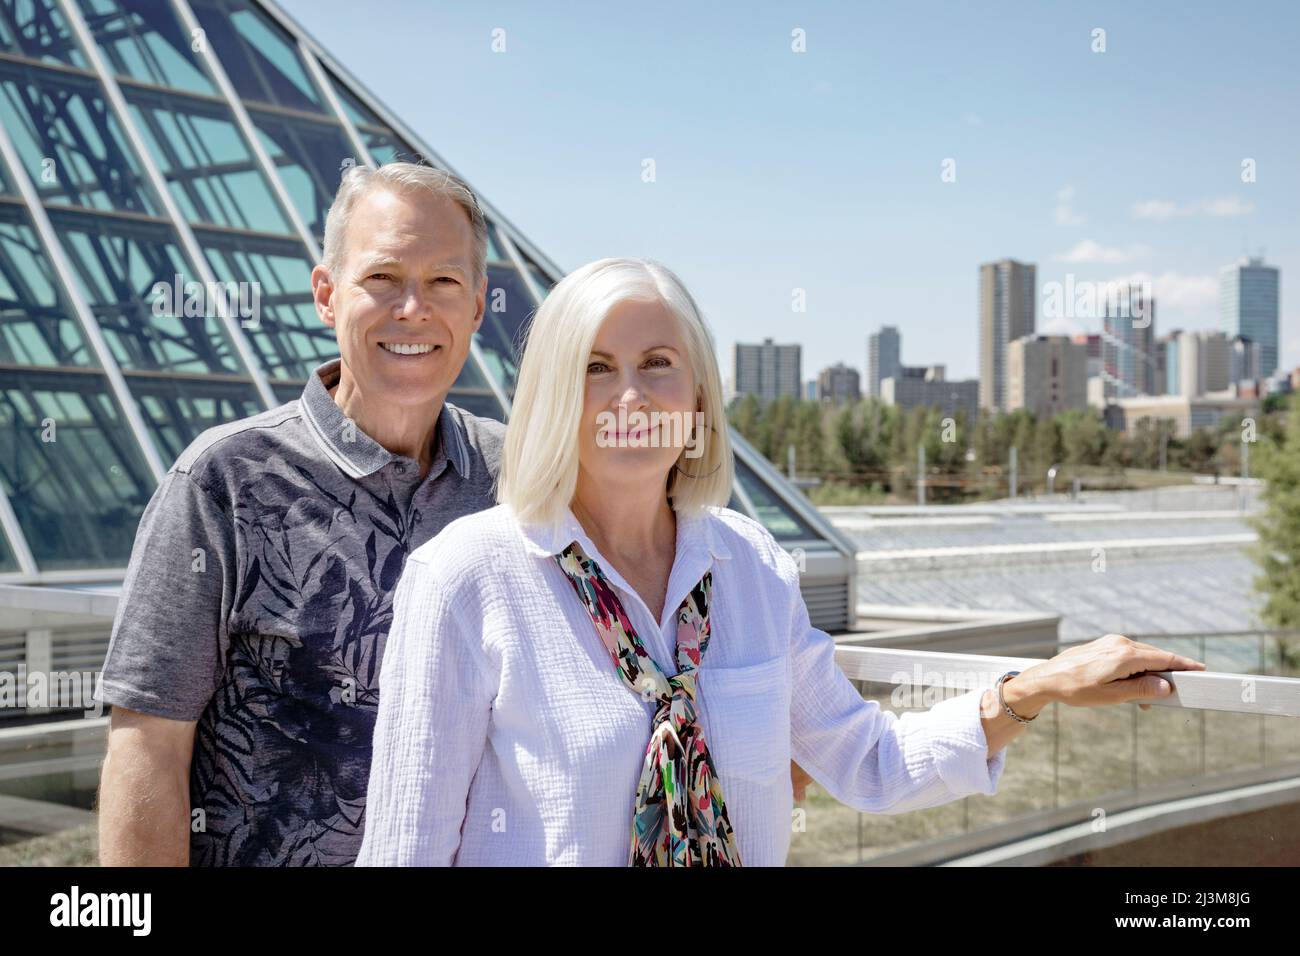 Outdoor portrait of a mature couple with a city skyline and architecture in the urban background; Edmonton, Alberta, Canada Stock Photo